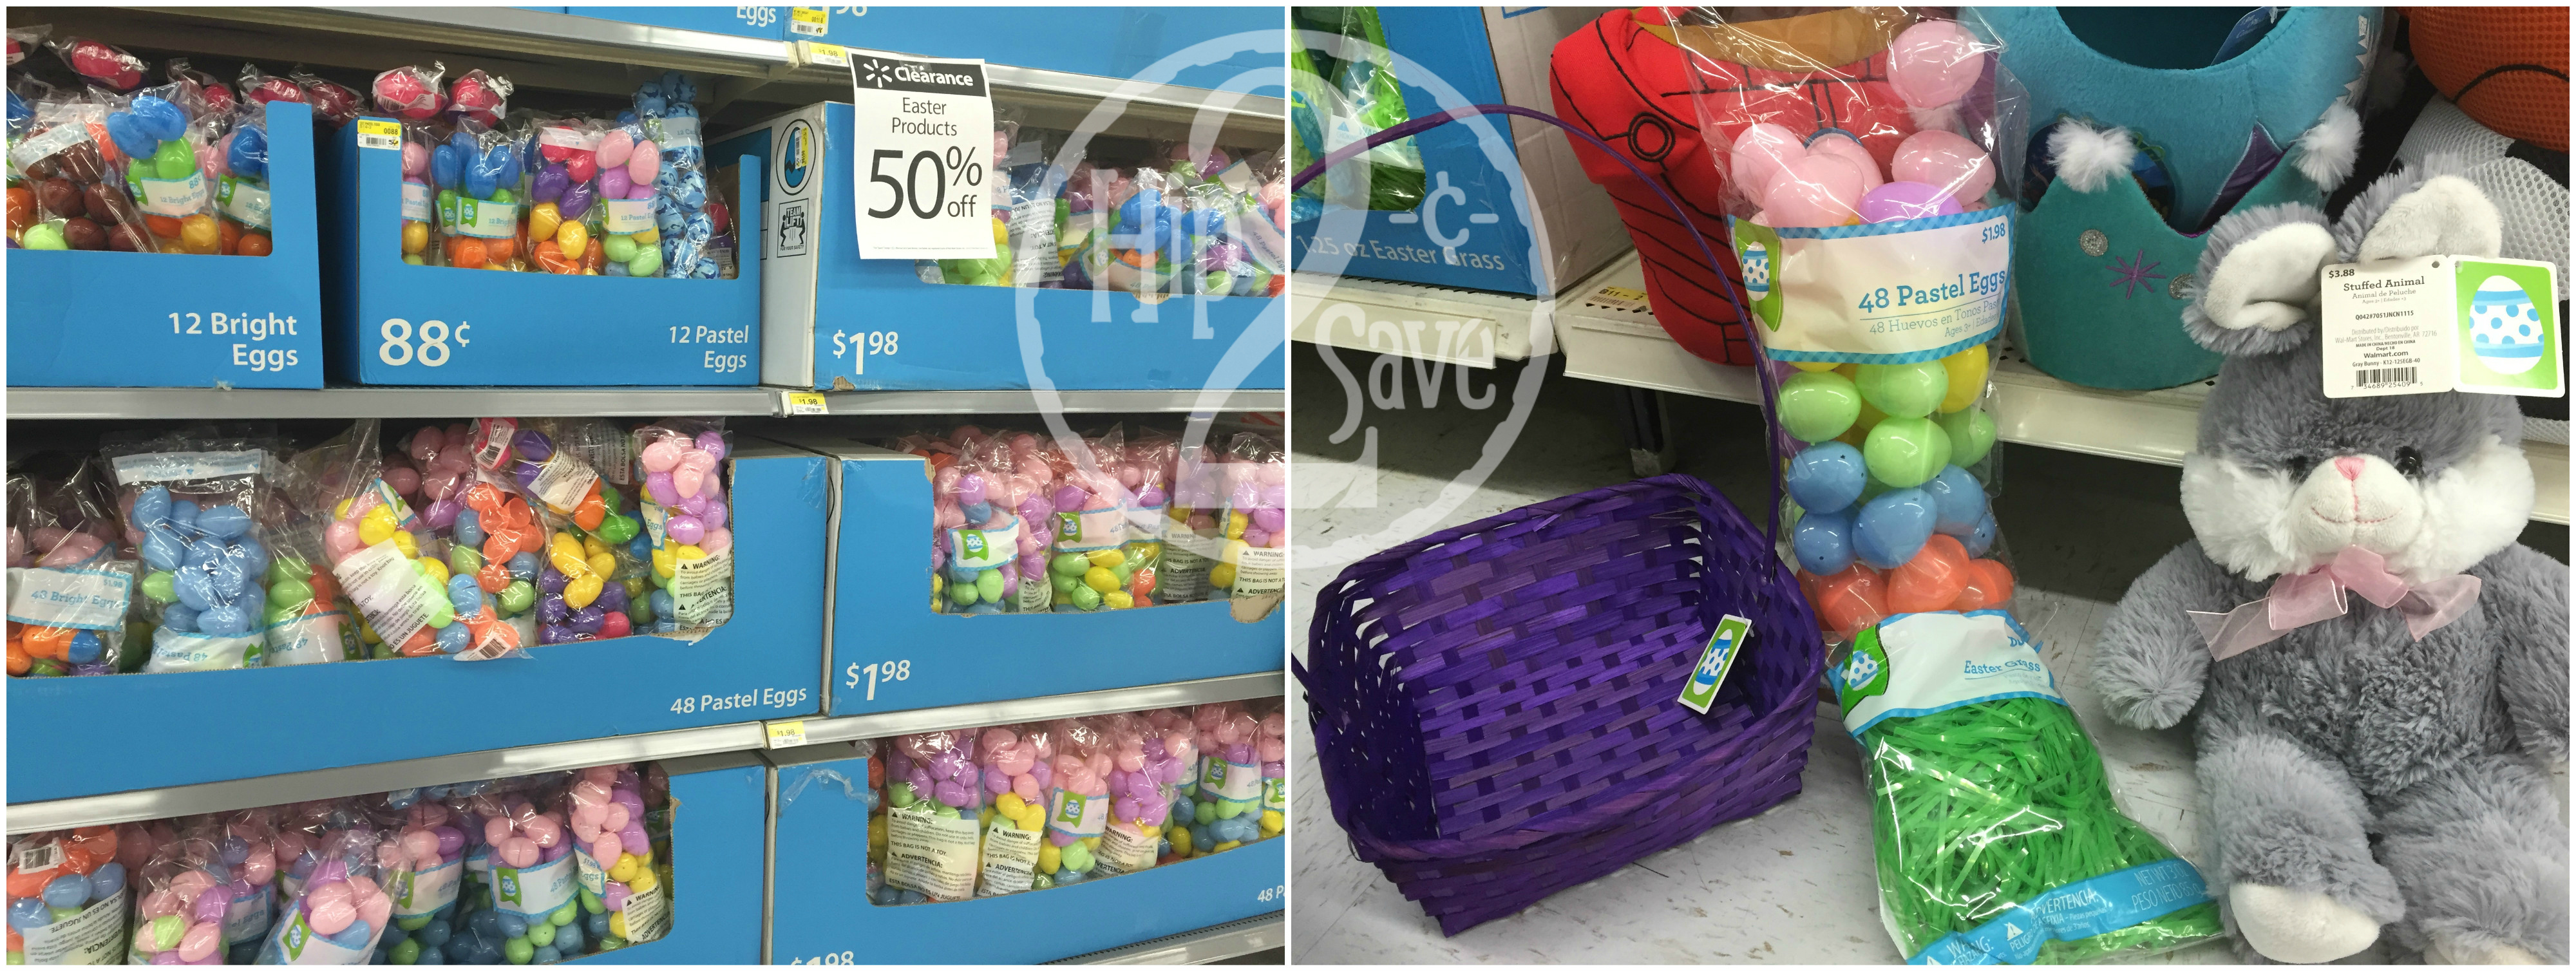 90% Off Easter Clearance at Walmart